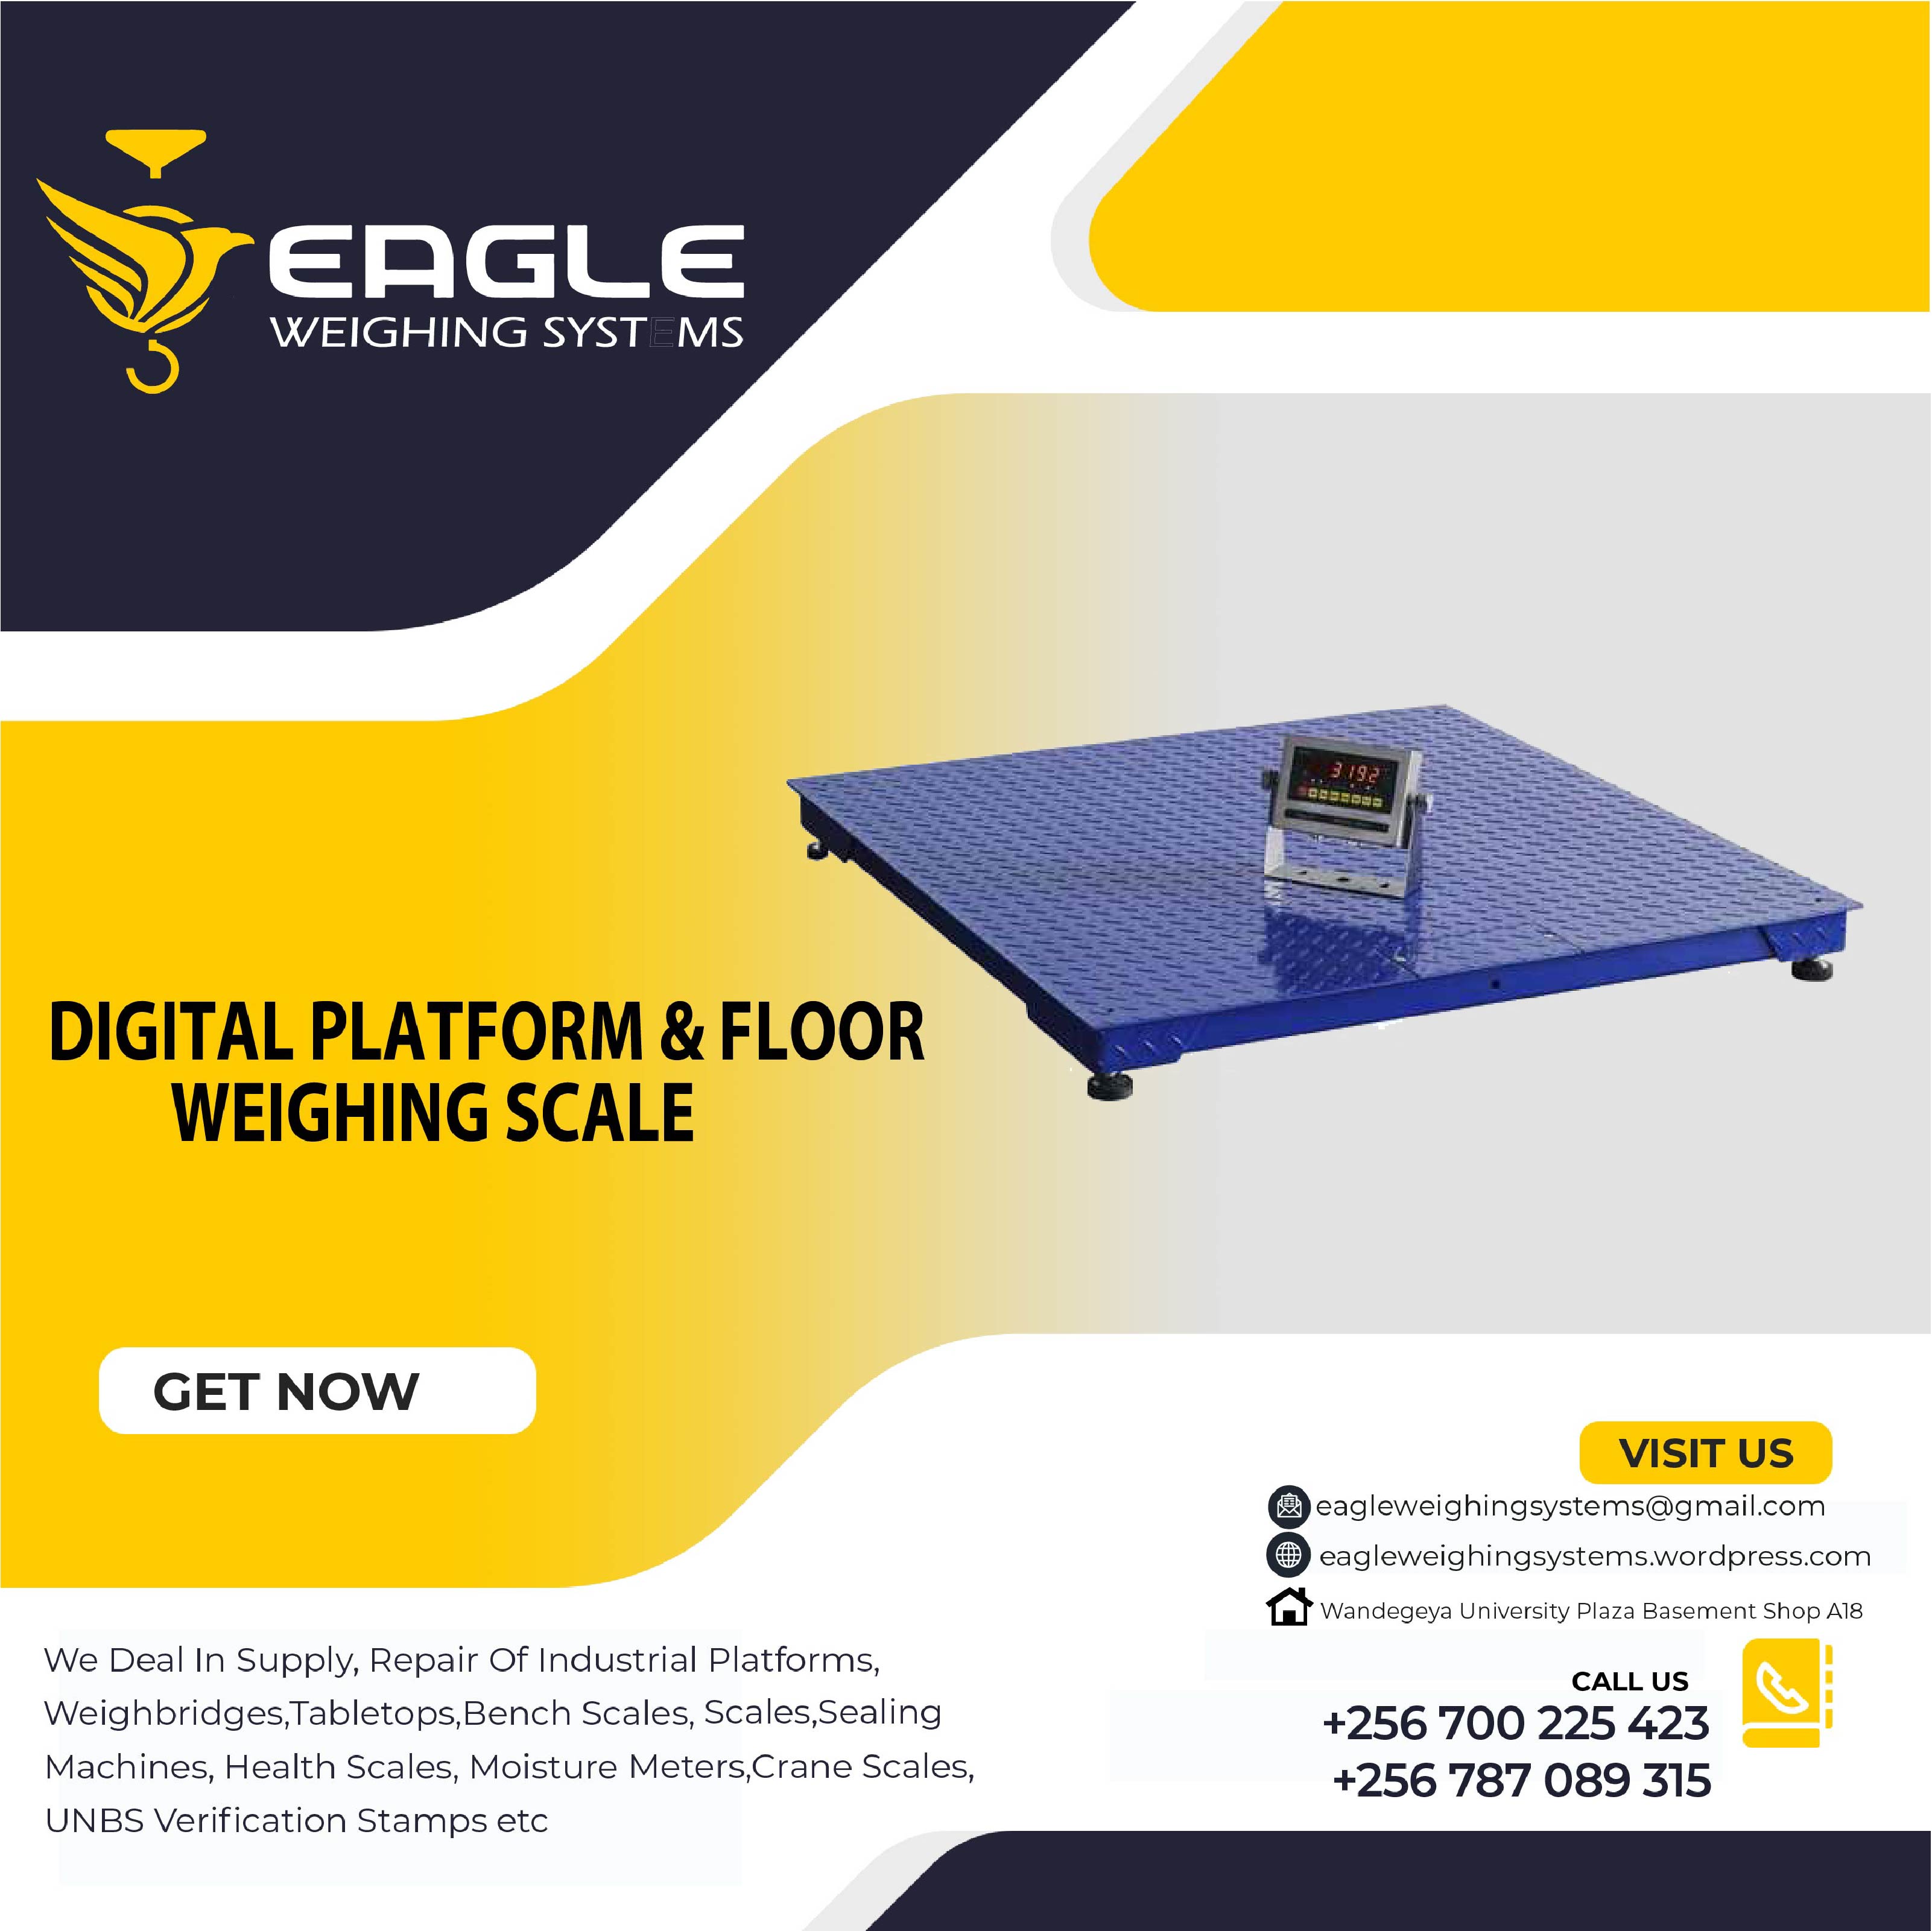 +256 (0) 700225423 Weight floor weighing scales for industries in Uganda, Kampala Central Division, Central, Uganda